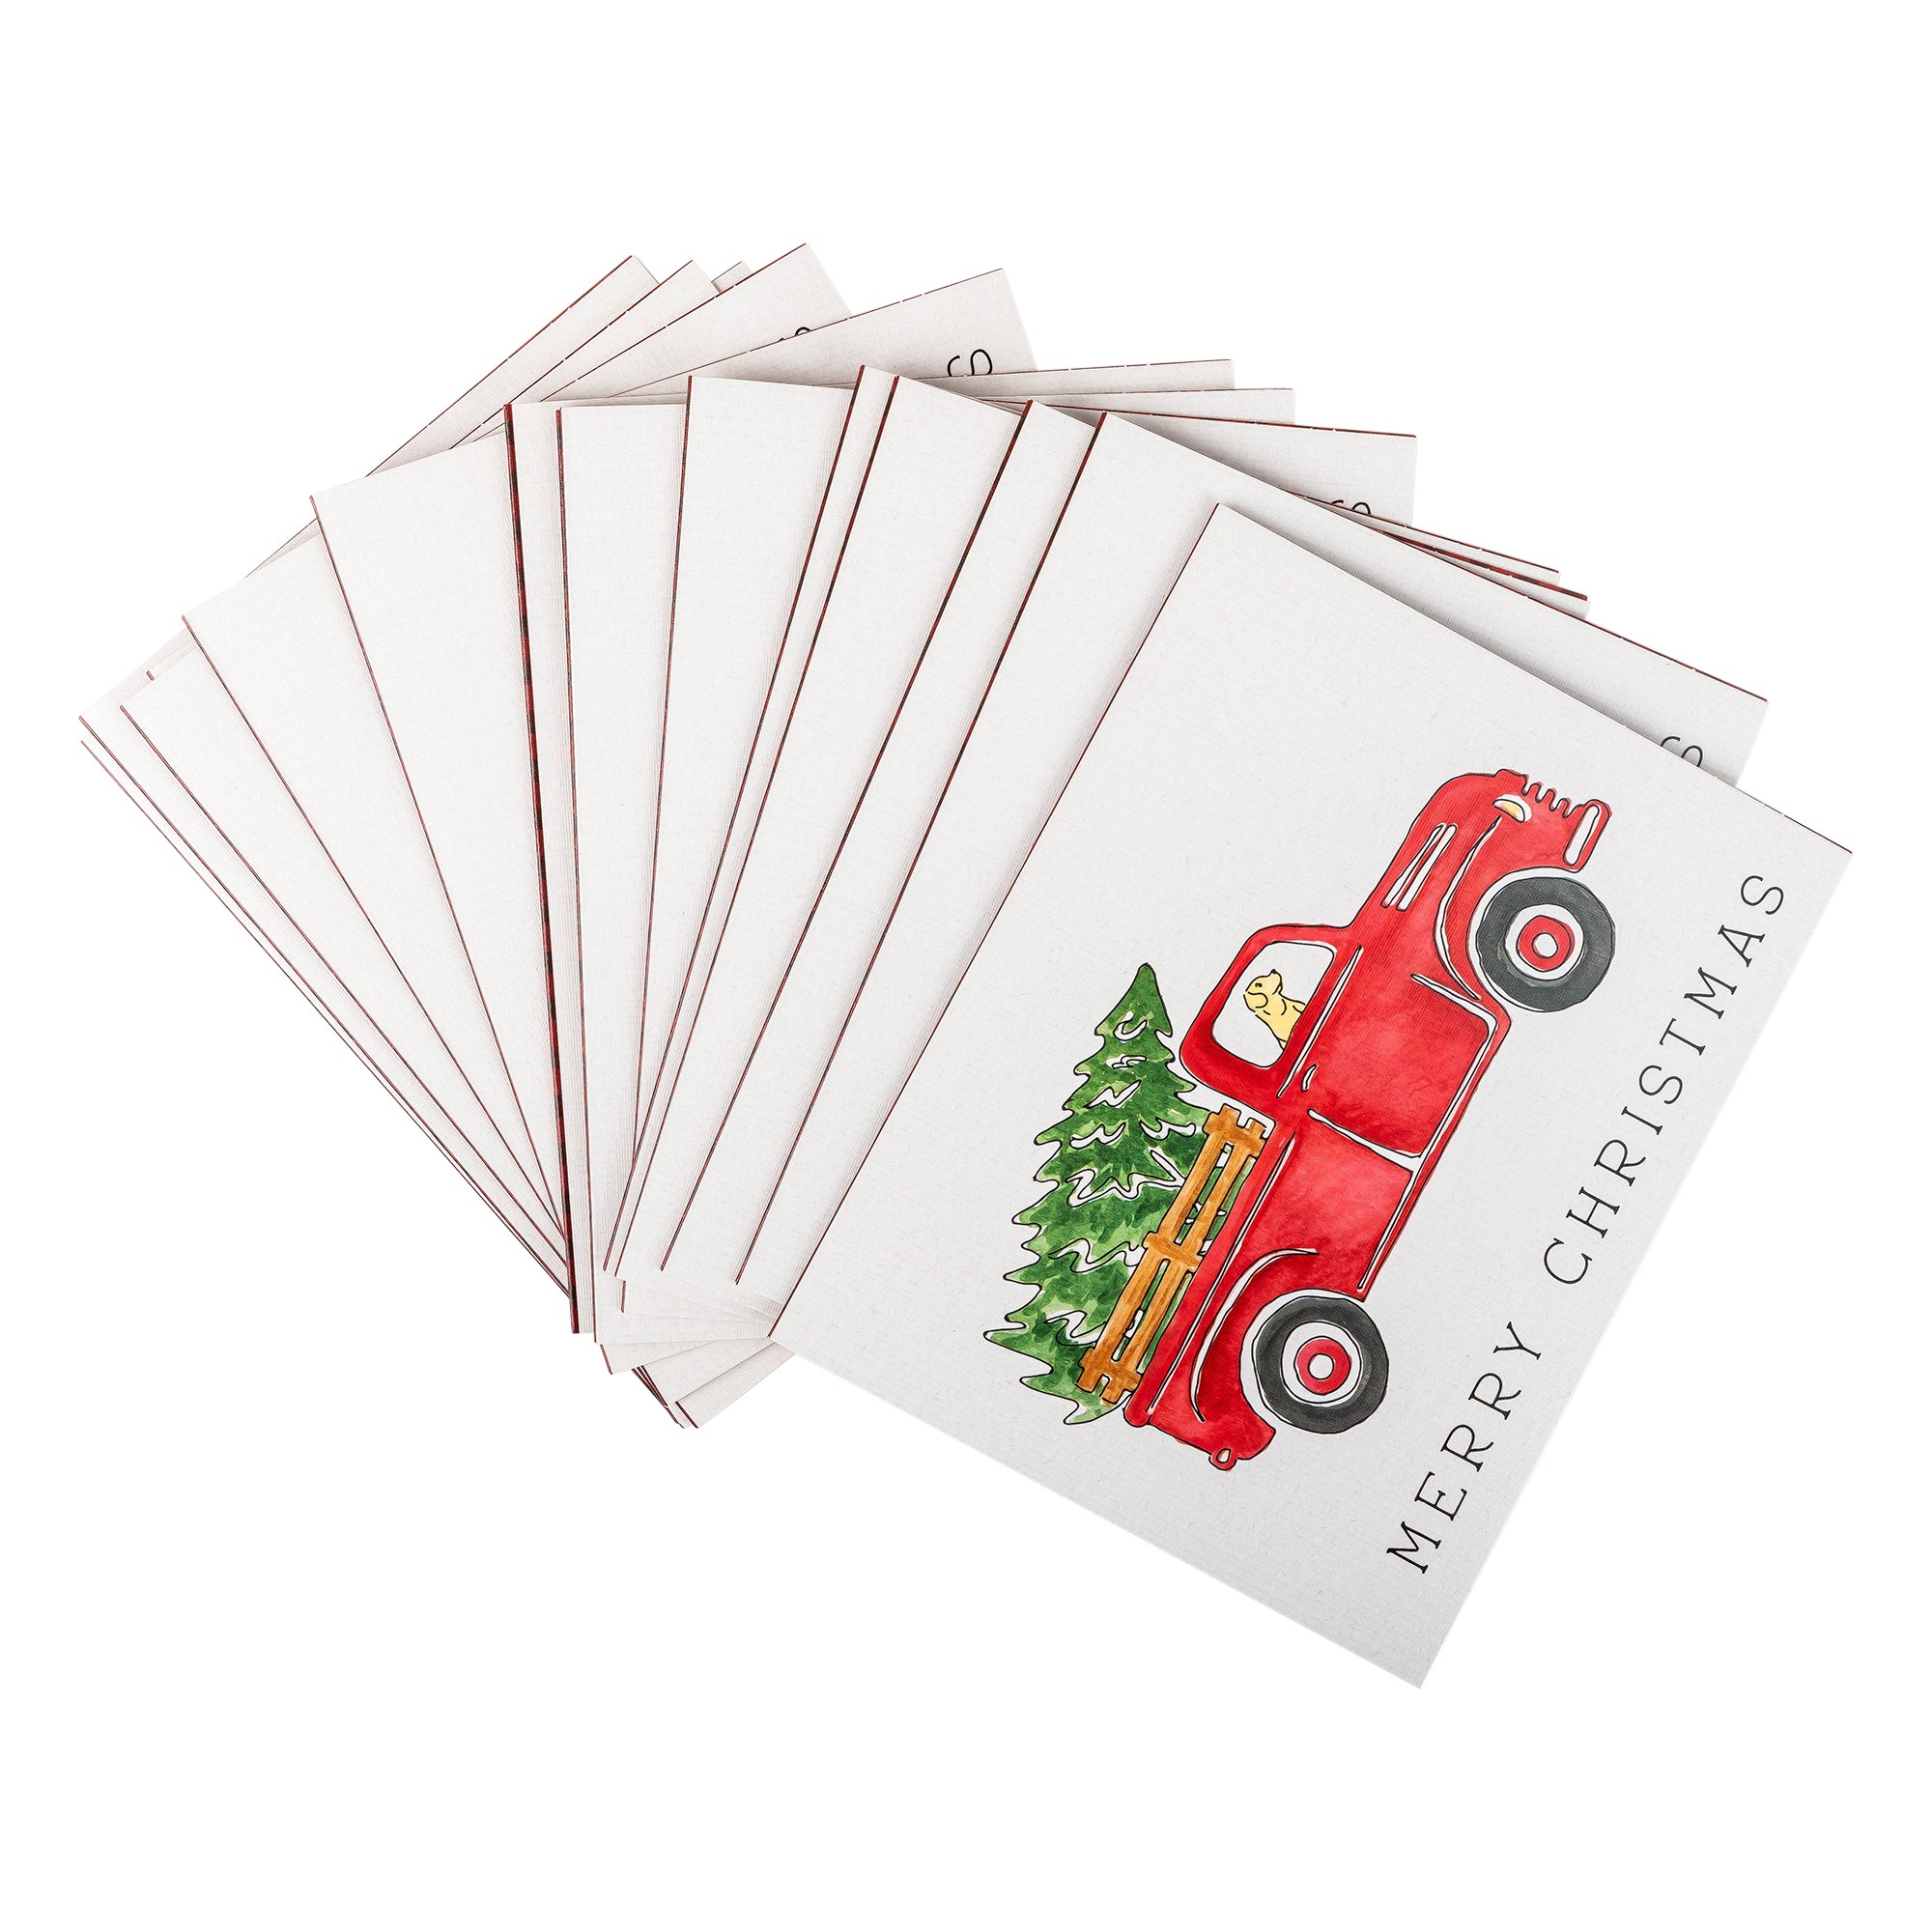 Boxed Christmas Cards: Red Plaid Truck